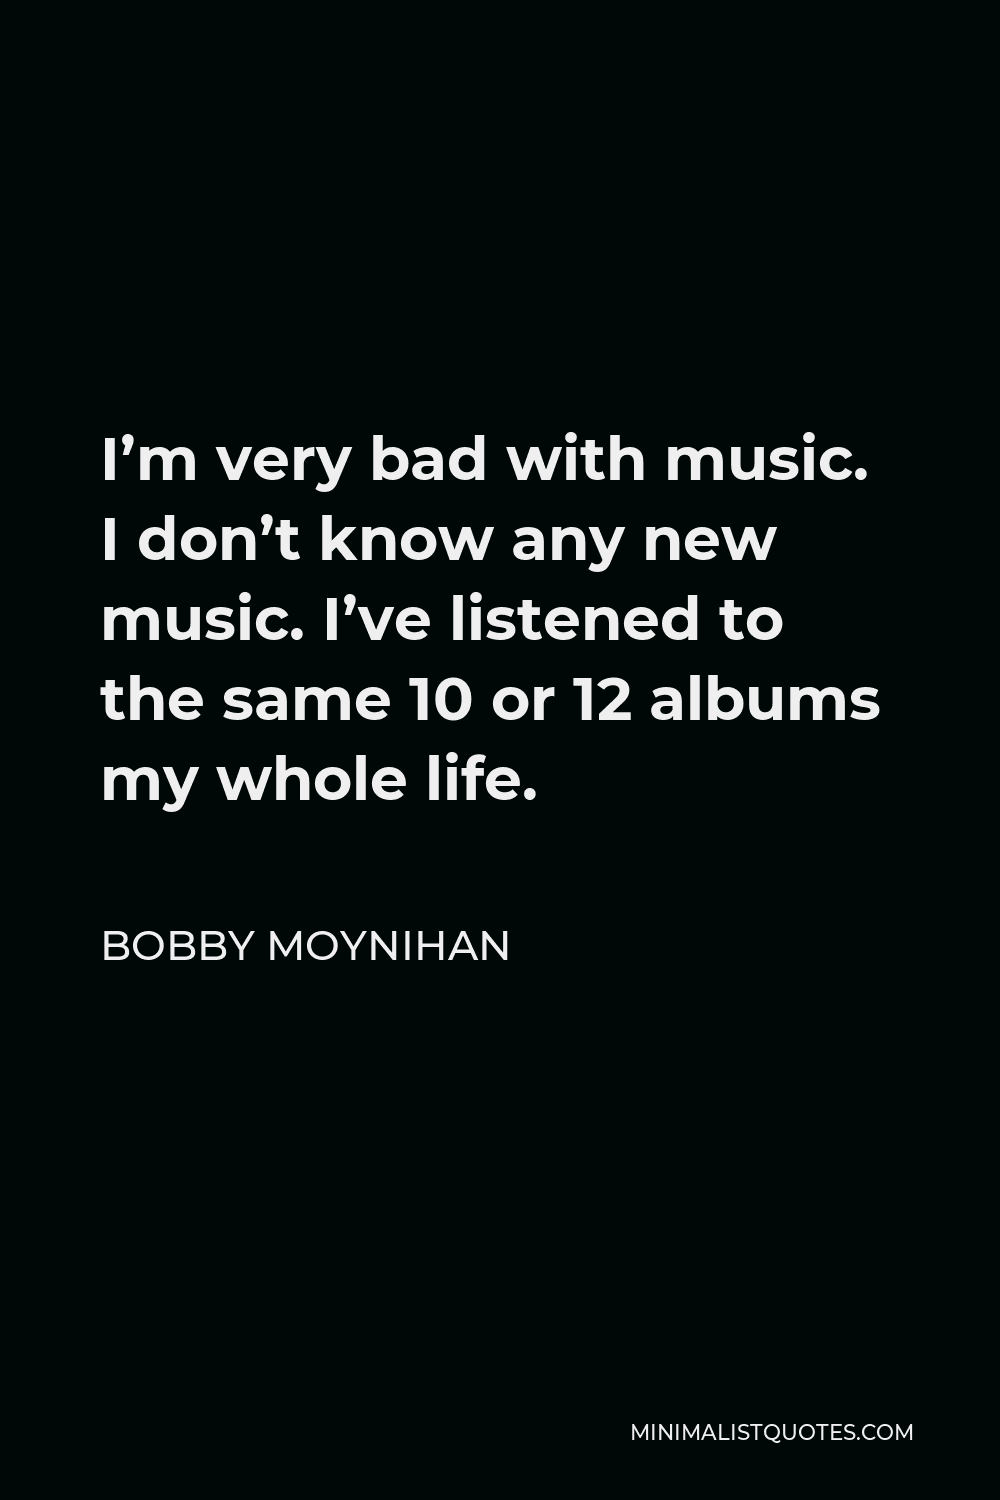 Bobby Moynihan Quote - I’m very bad with music. I don’t know any new music. I’ve listened to the same 10 or 12 albums my whole life.